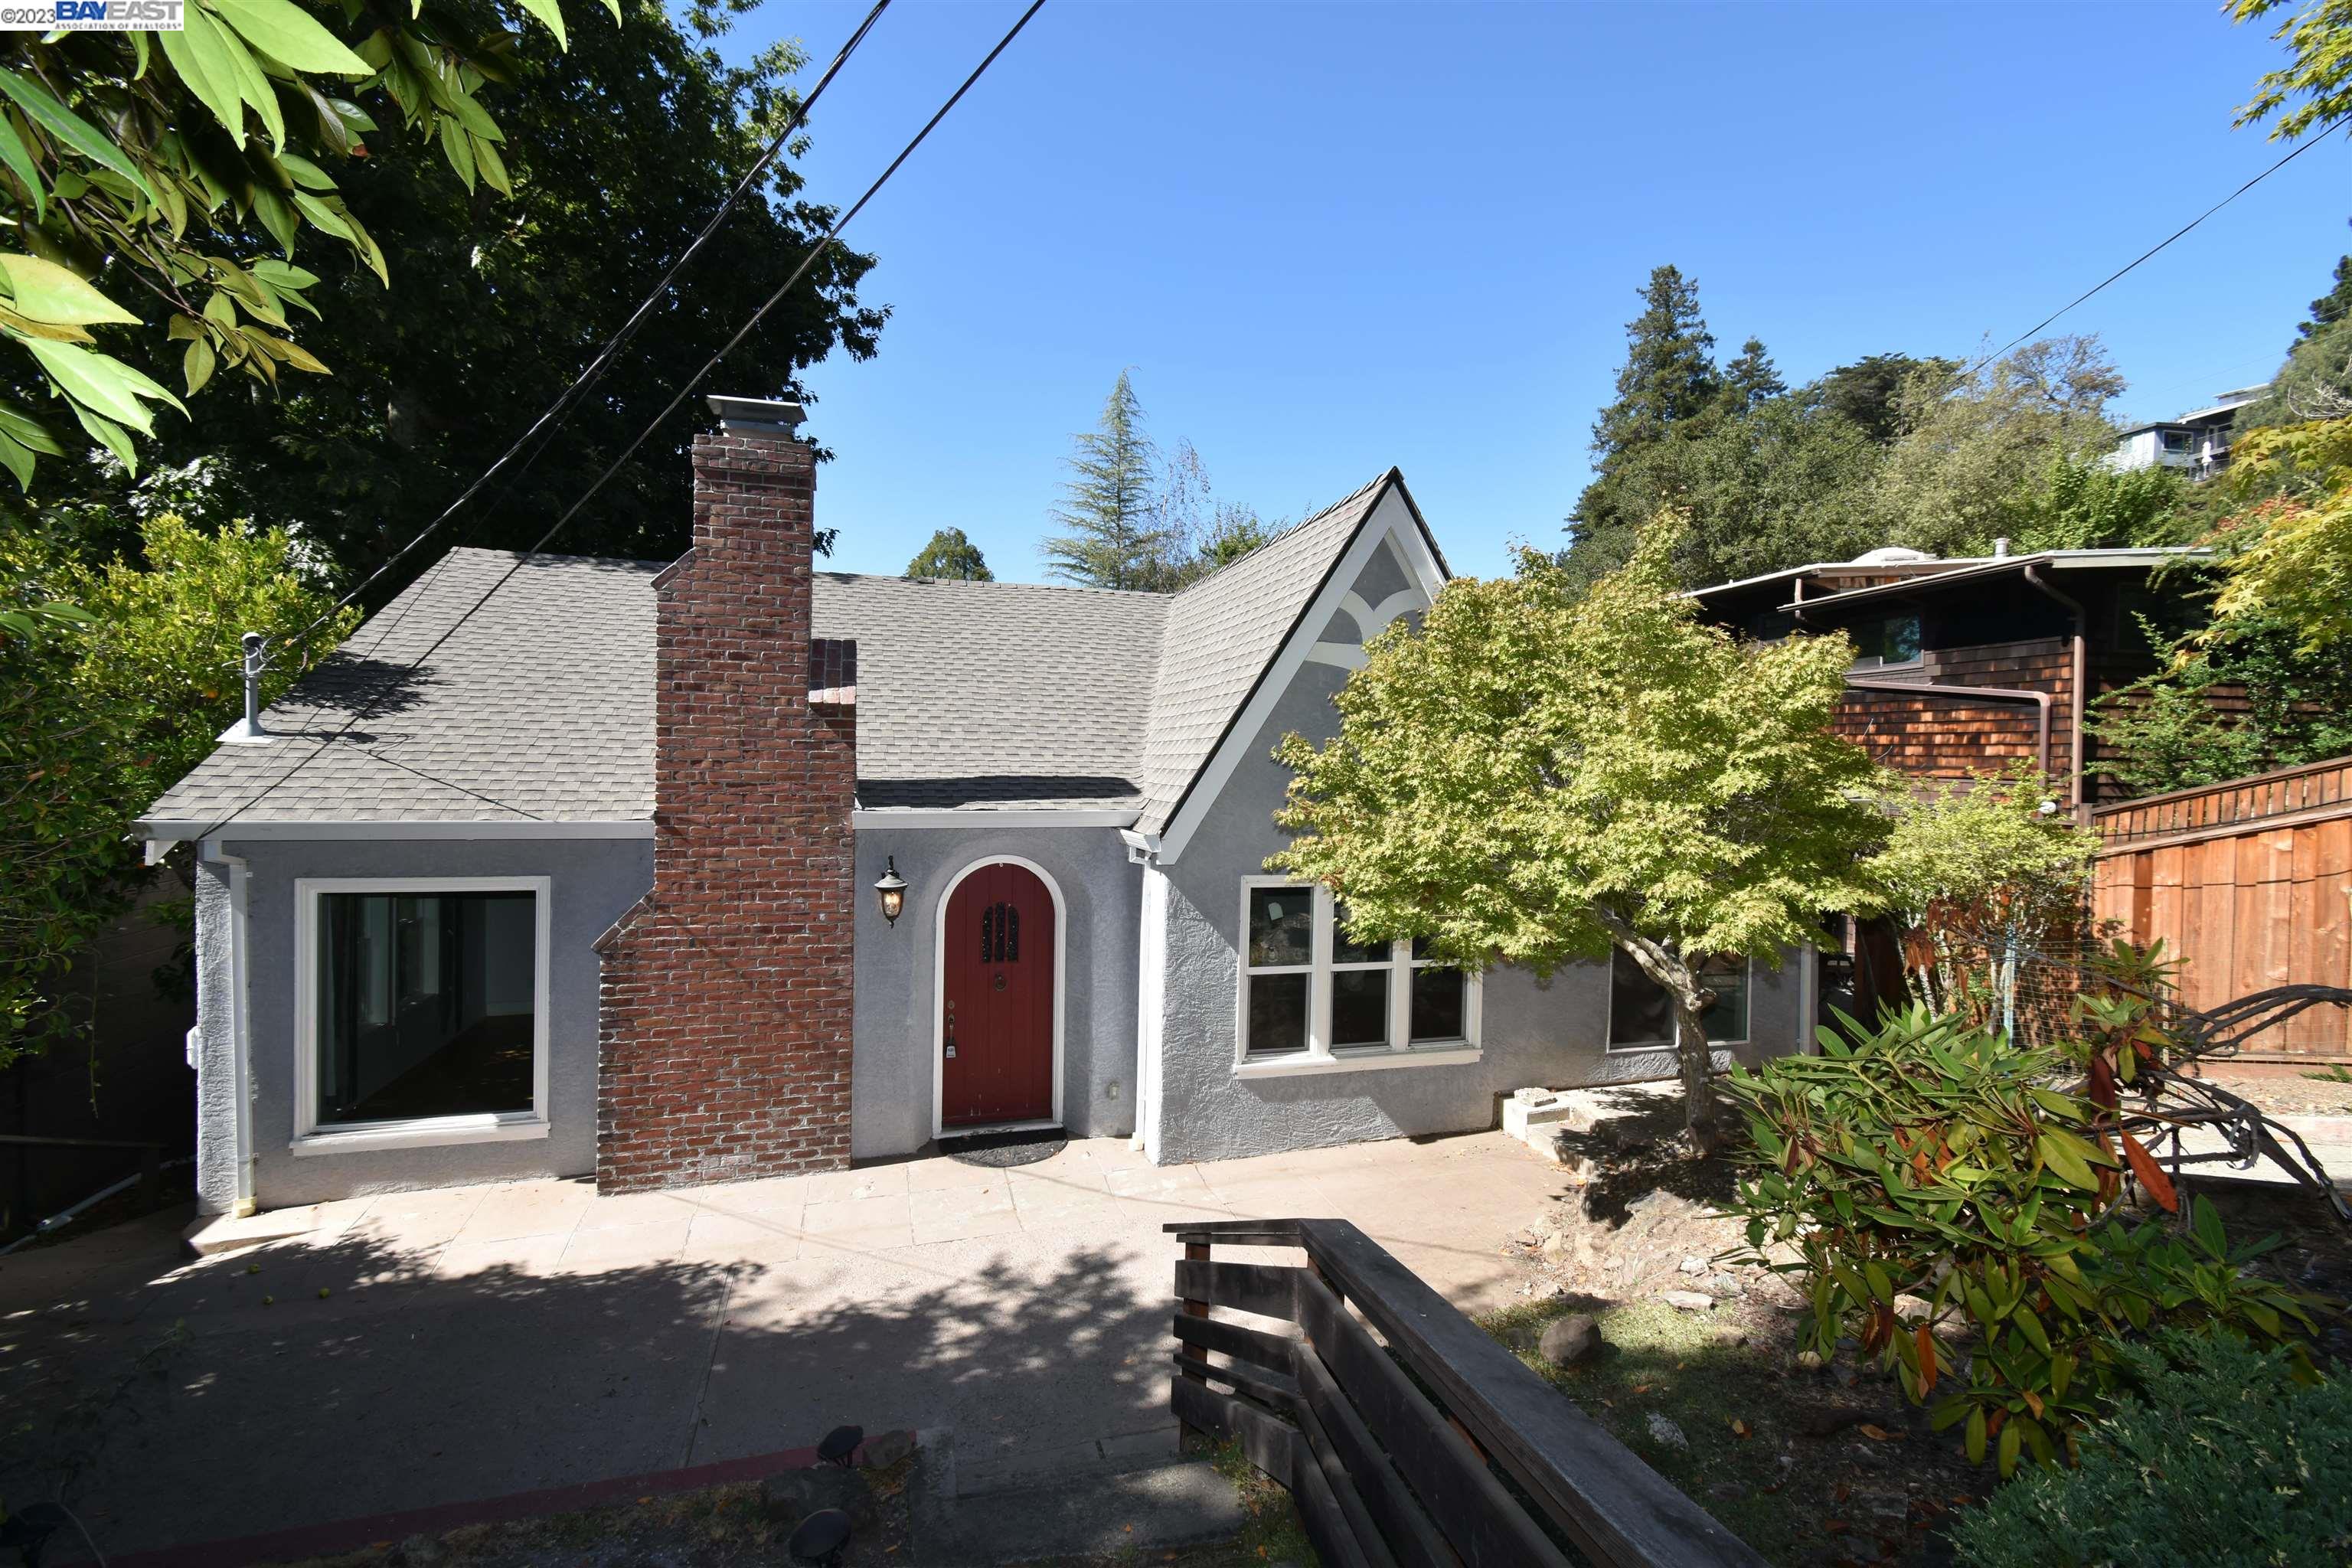 Fully upgraded with new flooring, bathrooms, kitchen, etc. English style cottage with 5 bedrooms and 3 1/2 baths. Ideally located in great neighborhood just minutes from UC Berkeley campus, Tilden Park and AC Transit line. Close to restaurants, cafes and specialty shops. Transparent Pricing.  Open House Sat 9/23 & Sun 9/24 - 1 pm - 4 pm  Deadline for submitting offers: Tuesday 9/26 @ 5 pm